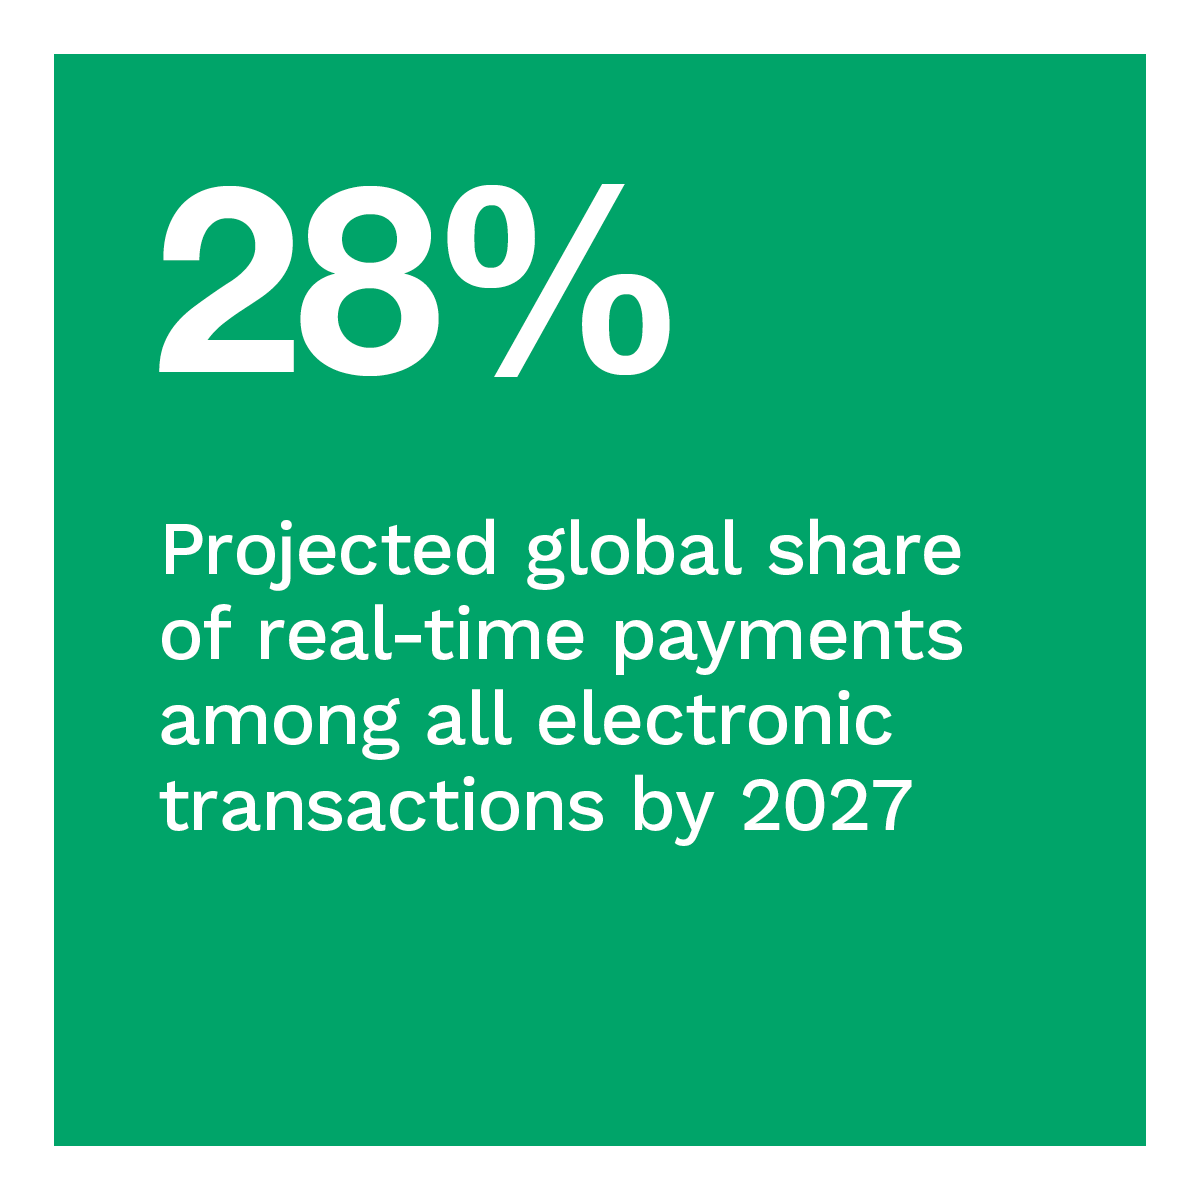  Projected global share of real-time payments among all electronic transactions by 2027